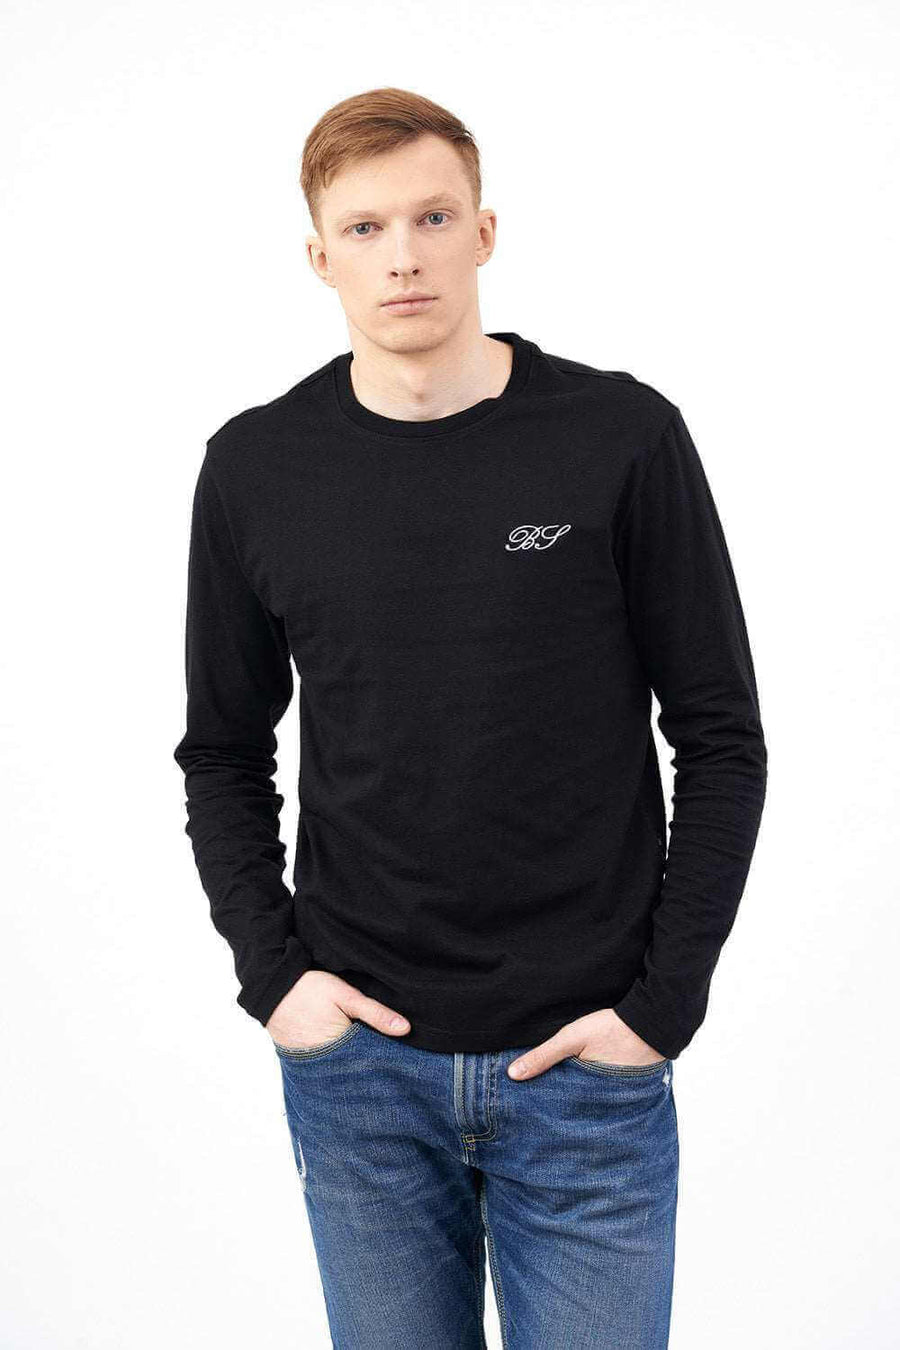 Front Pose of Crew Neck Men's Shirts in Black